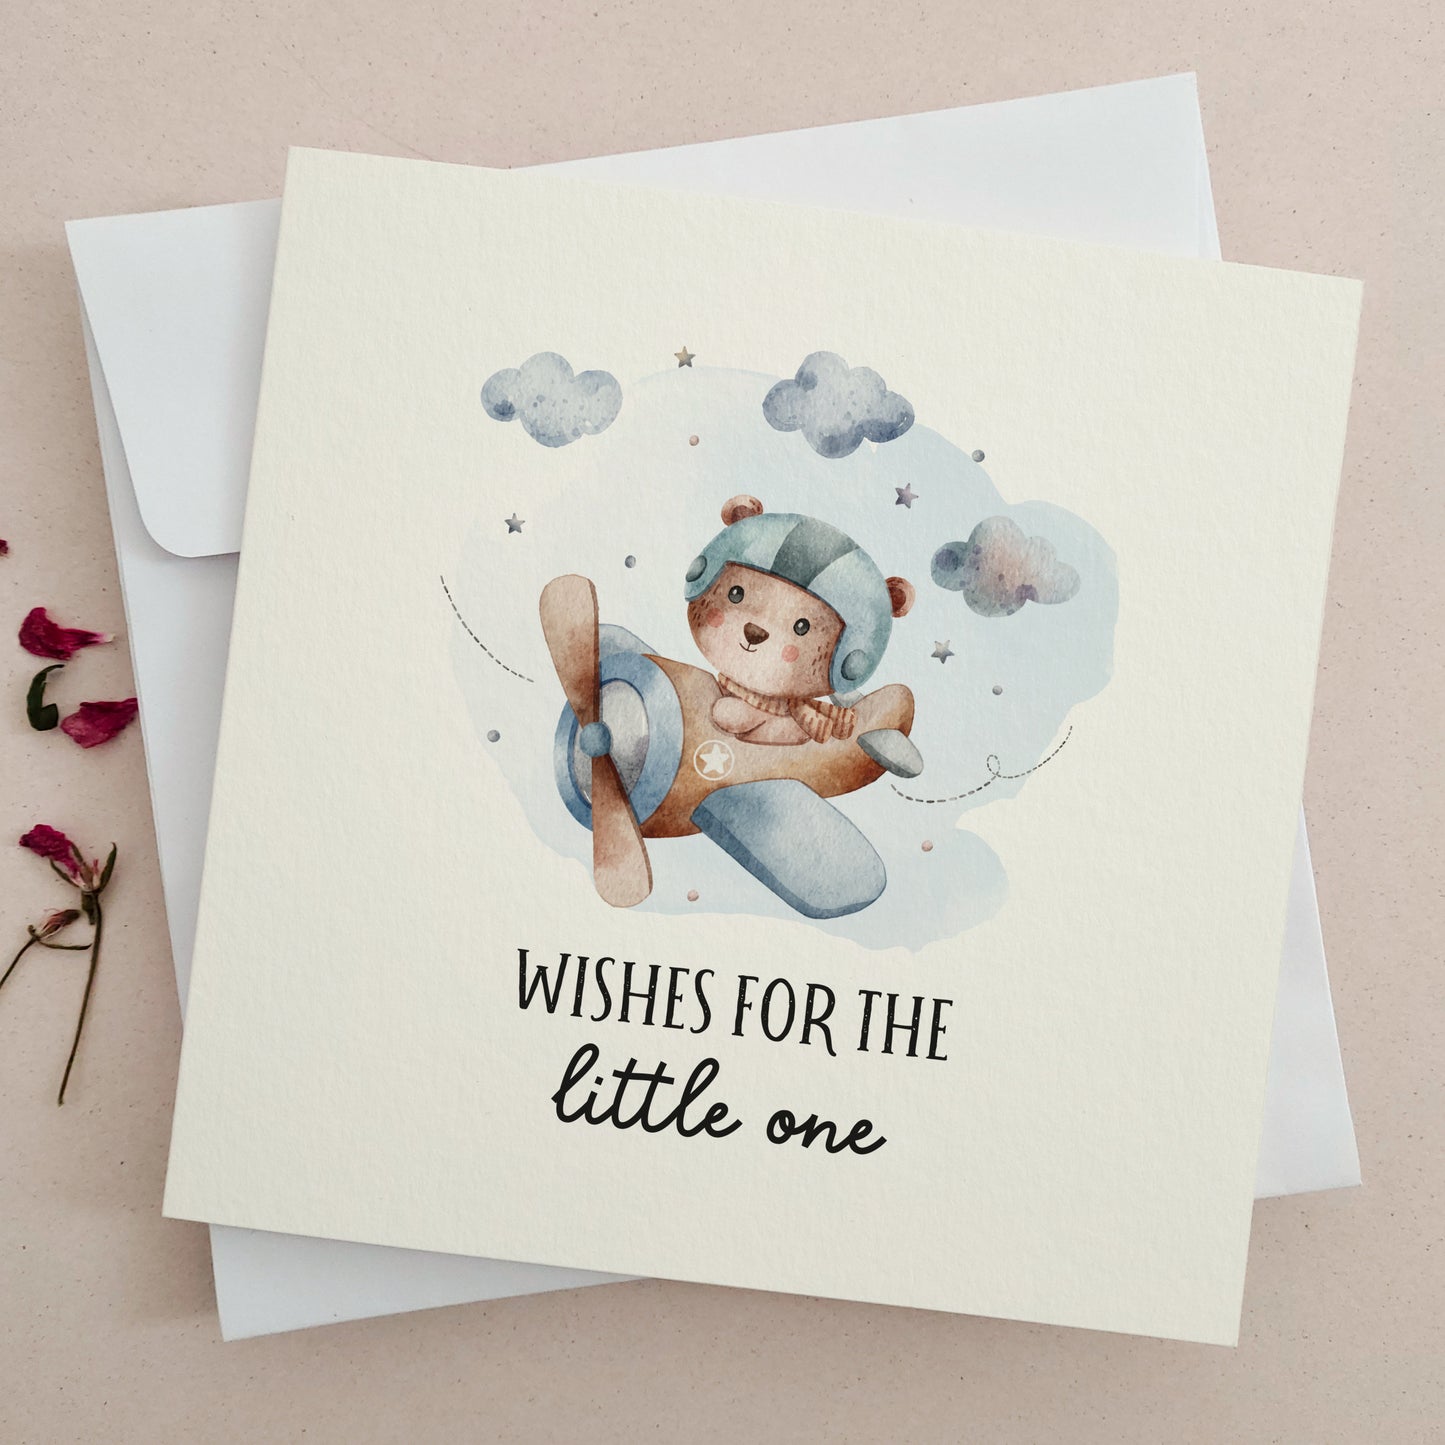 wishes for the little one card to congratulate on a new baby  - XOXOKristen